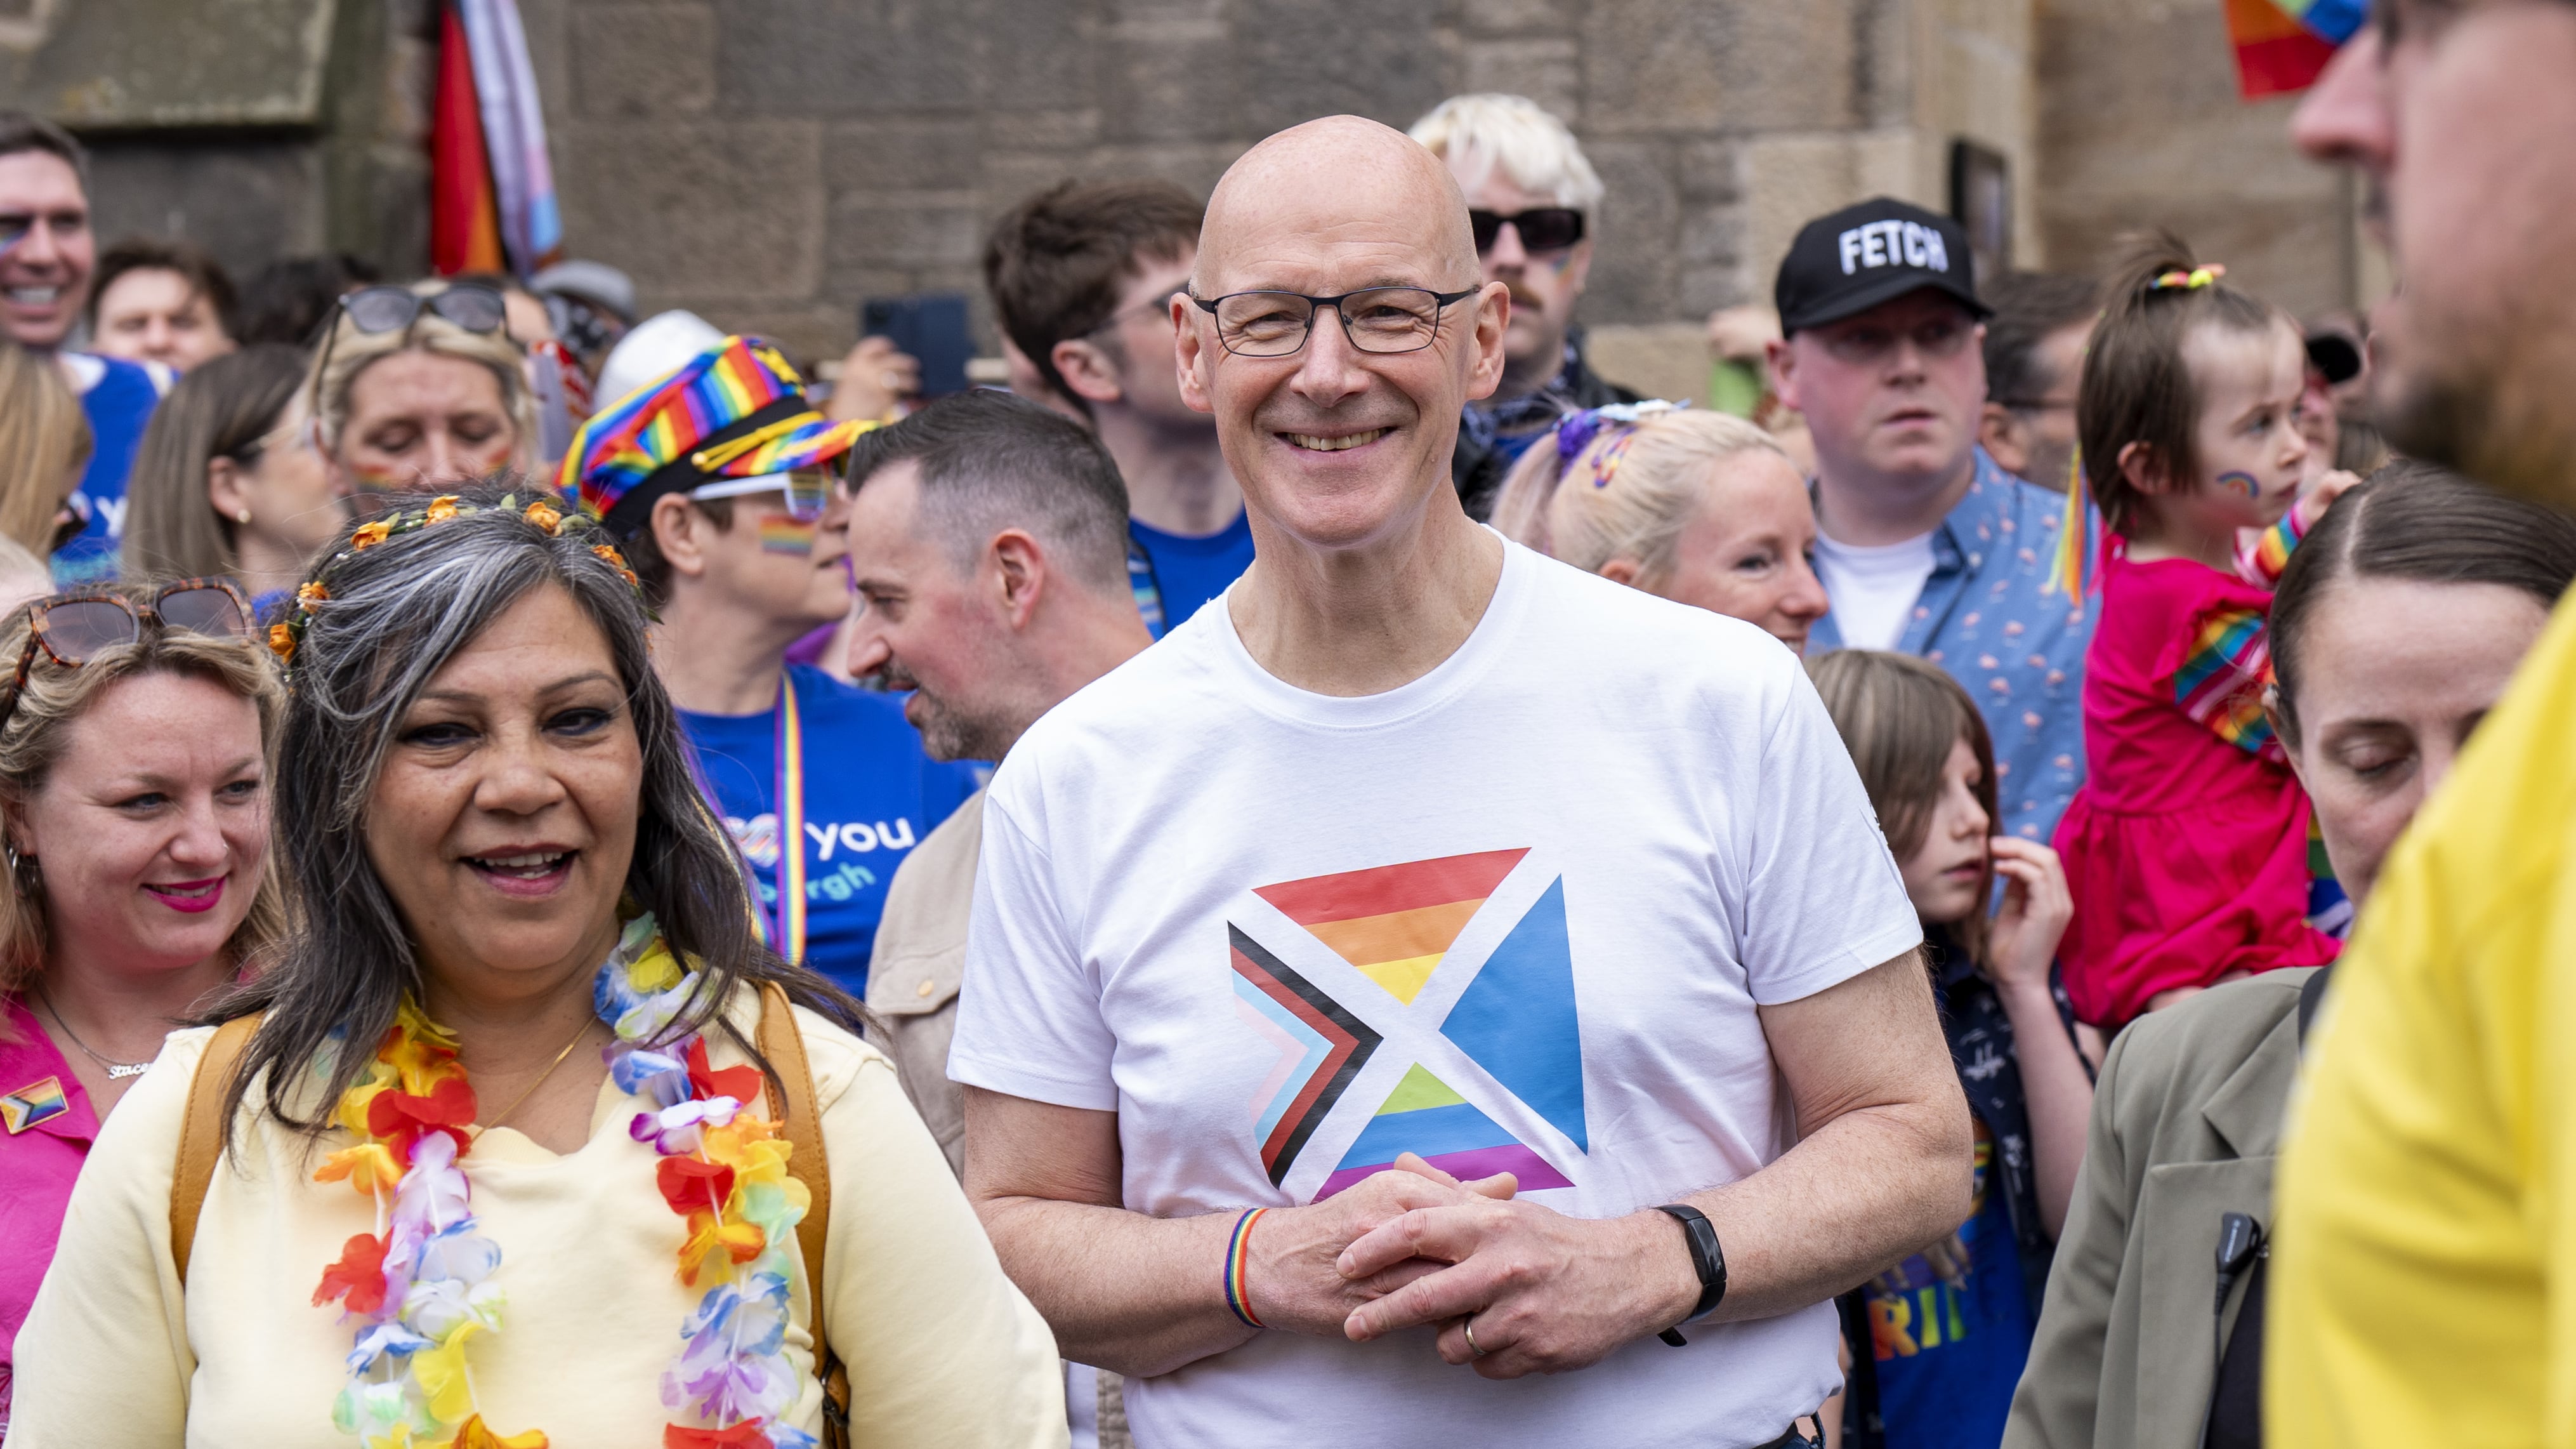 The First Minister spoke after marching in Edinburgh Pride